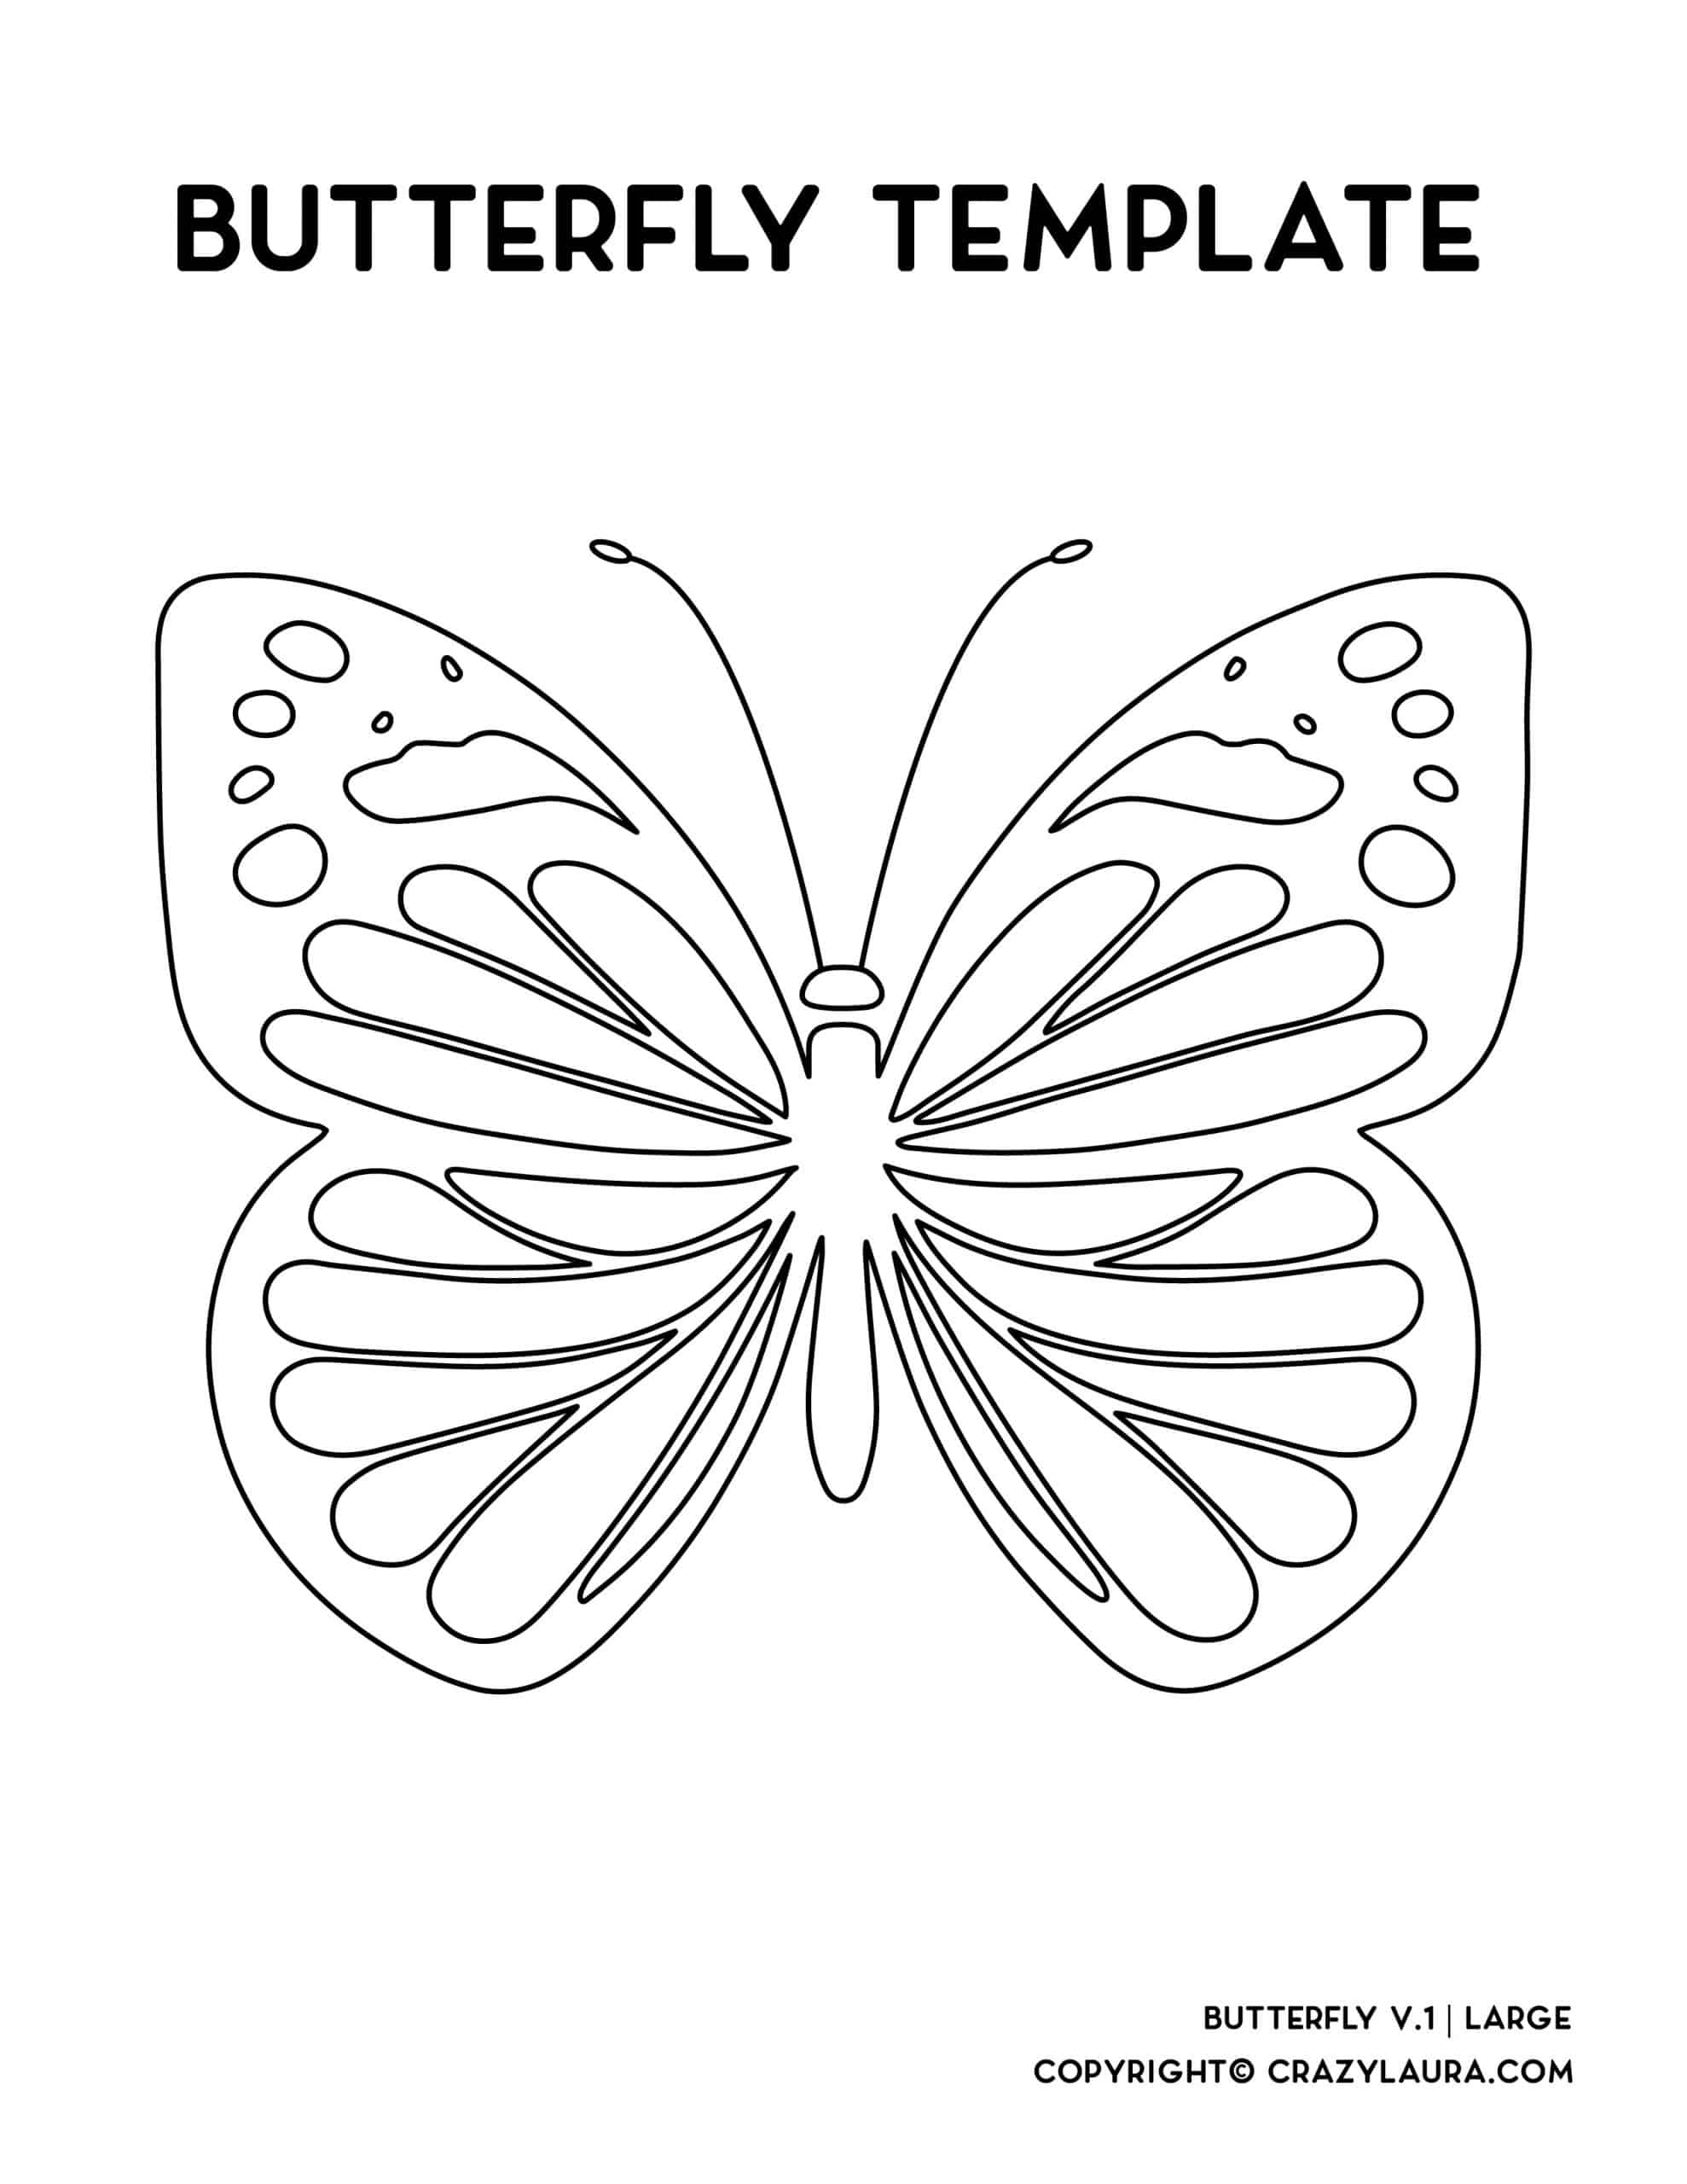 free adult coloring page of butterflies